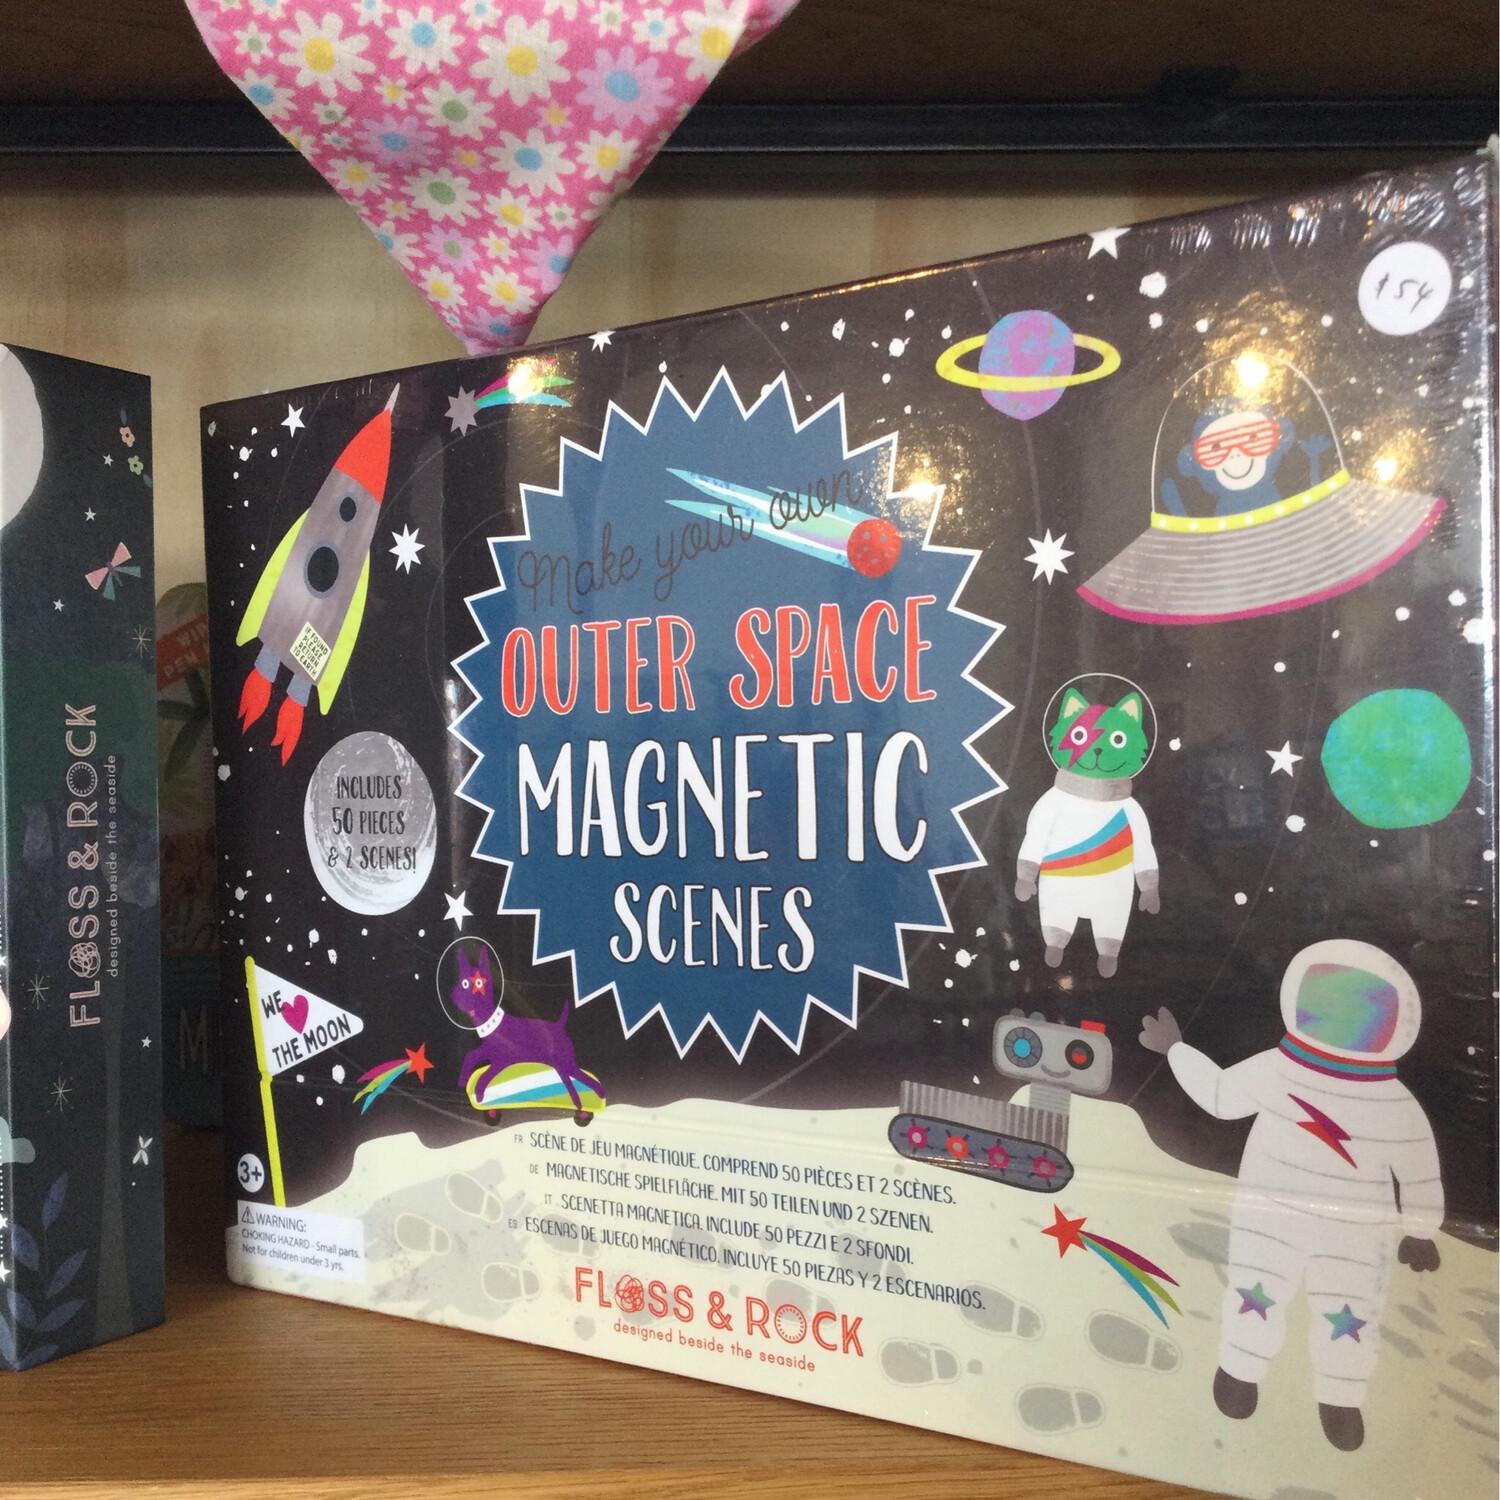 Magnetic Scenes by Floss & Rock - Outer Space, Fairy or Pets